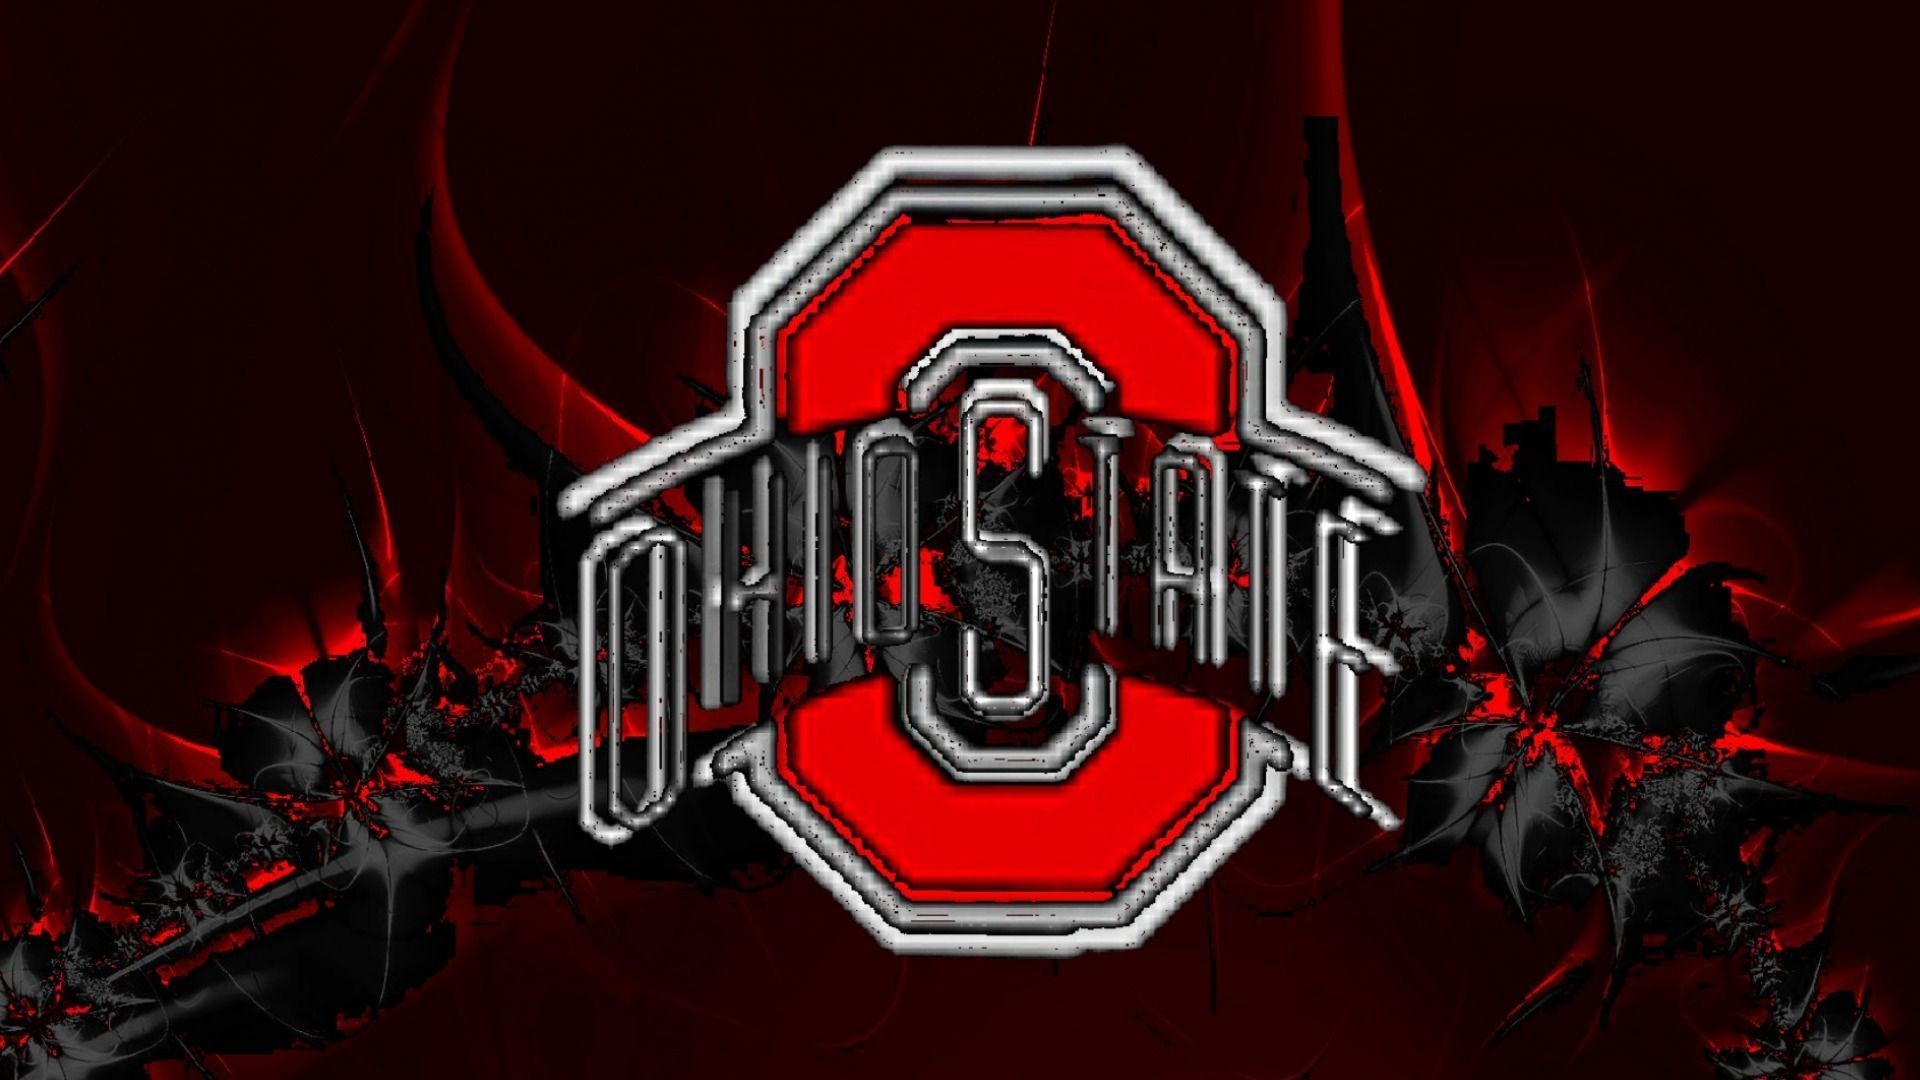 1920x1080 Ohio State Buckeyes images BUCKEYES ON AN ABSTRACT HD wallpaper 1920Ã1080  Ohio State Backgrounds (45 Wallpapers) | Adorable Wallpapers